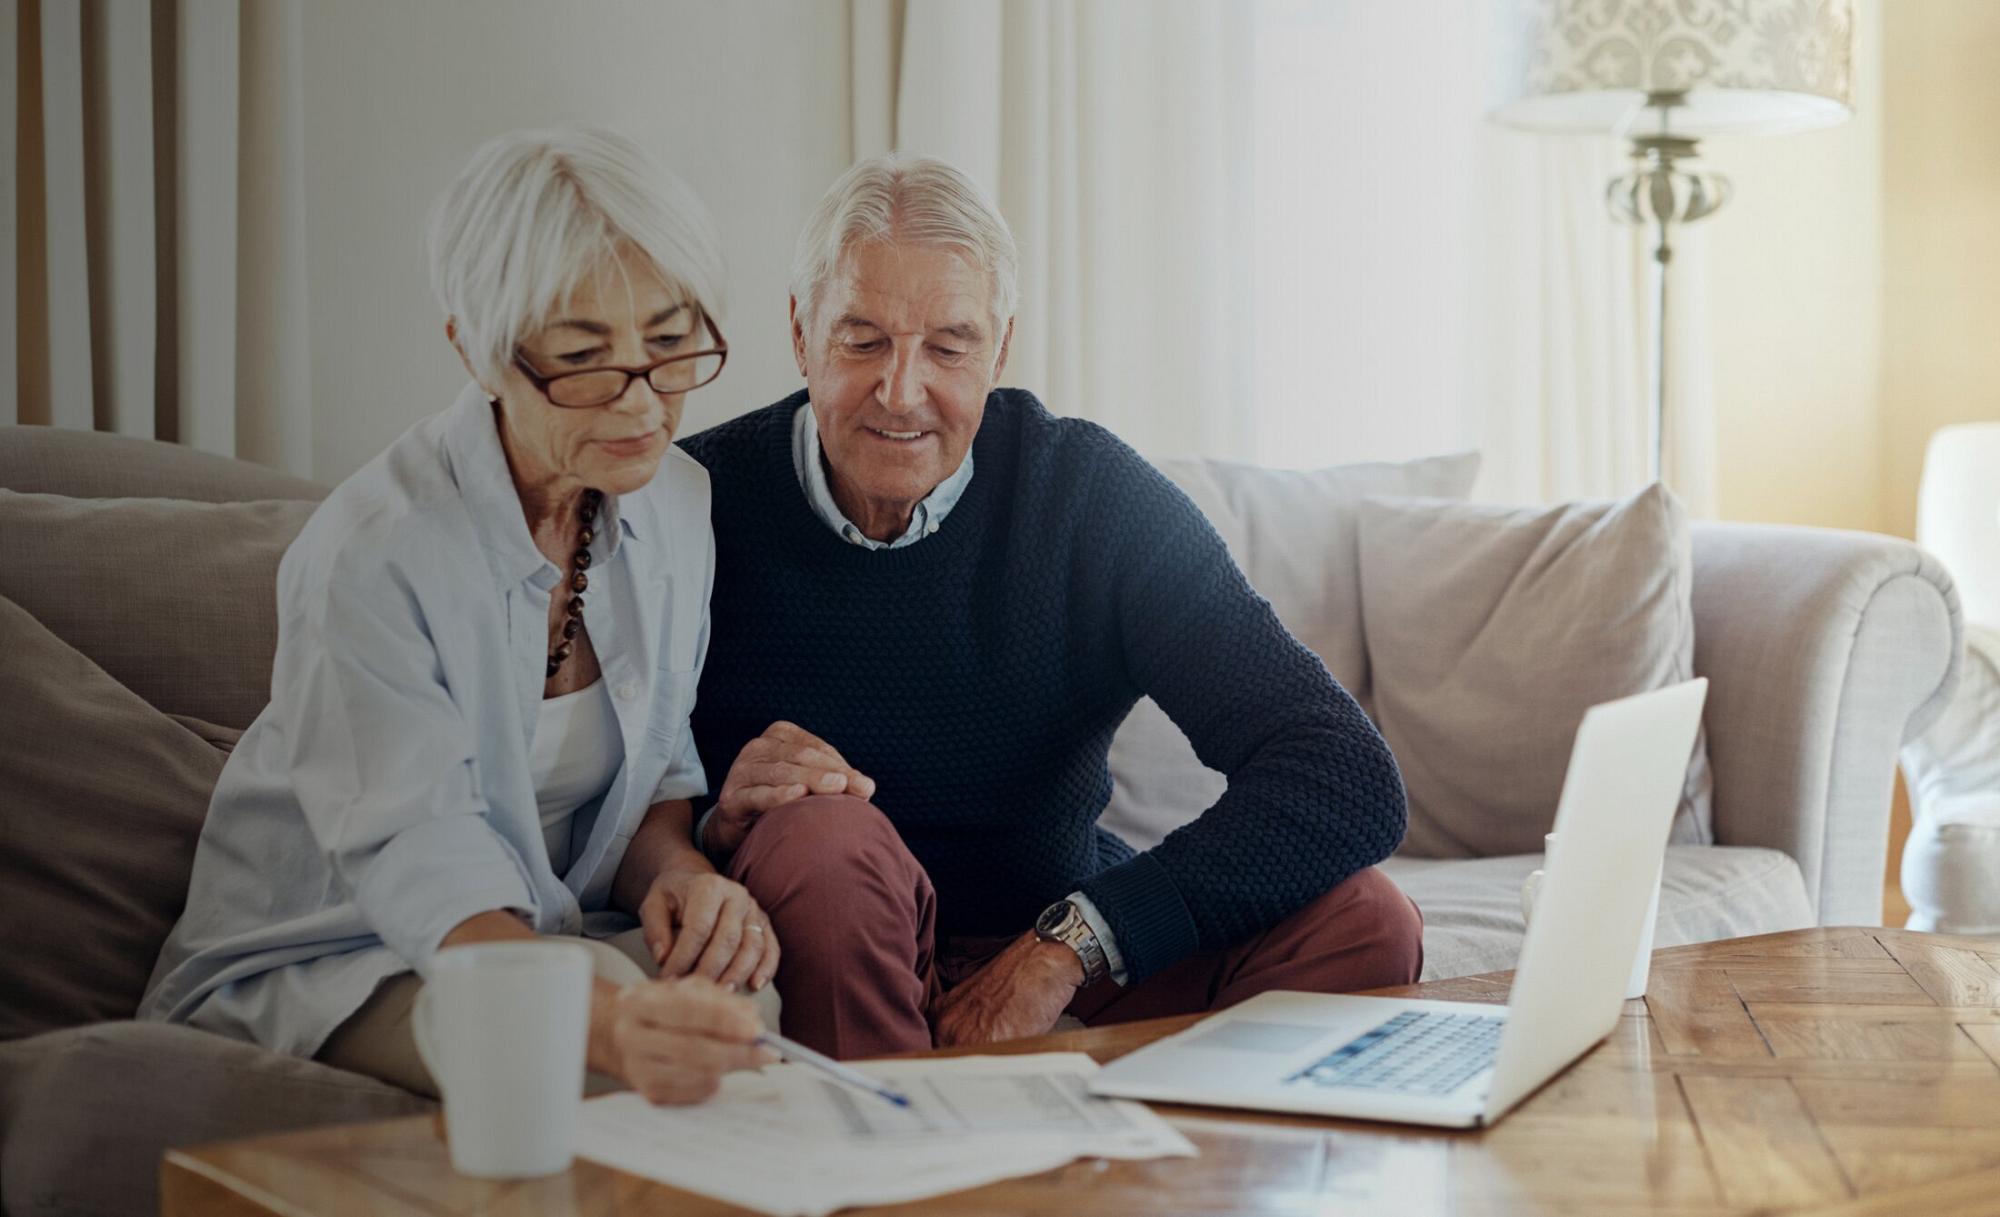 Tax Savings for Business Owners feature - Older couple reviewing financial documents